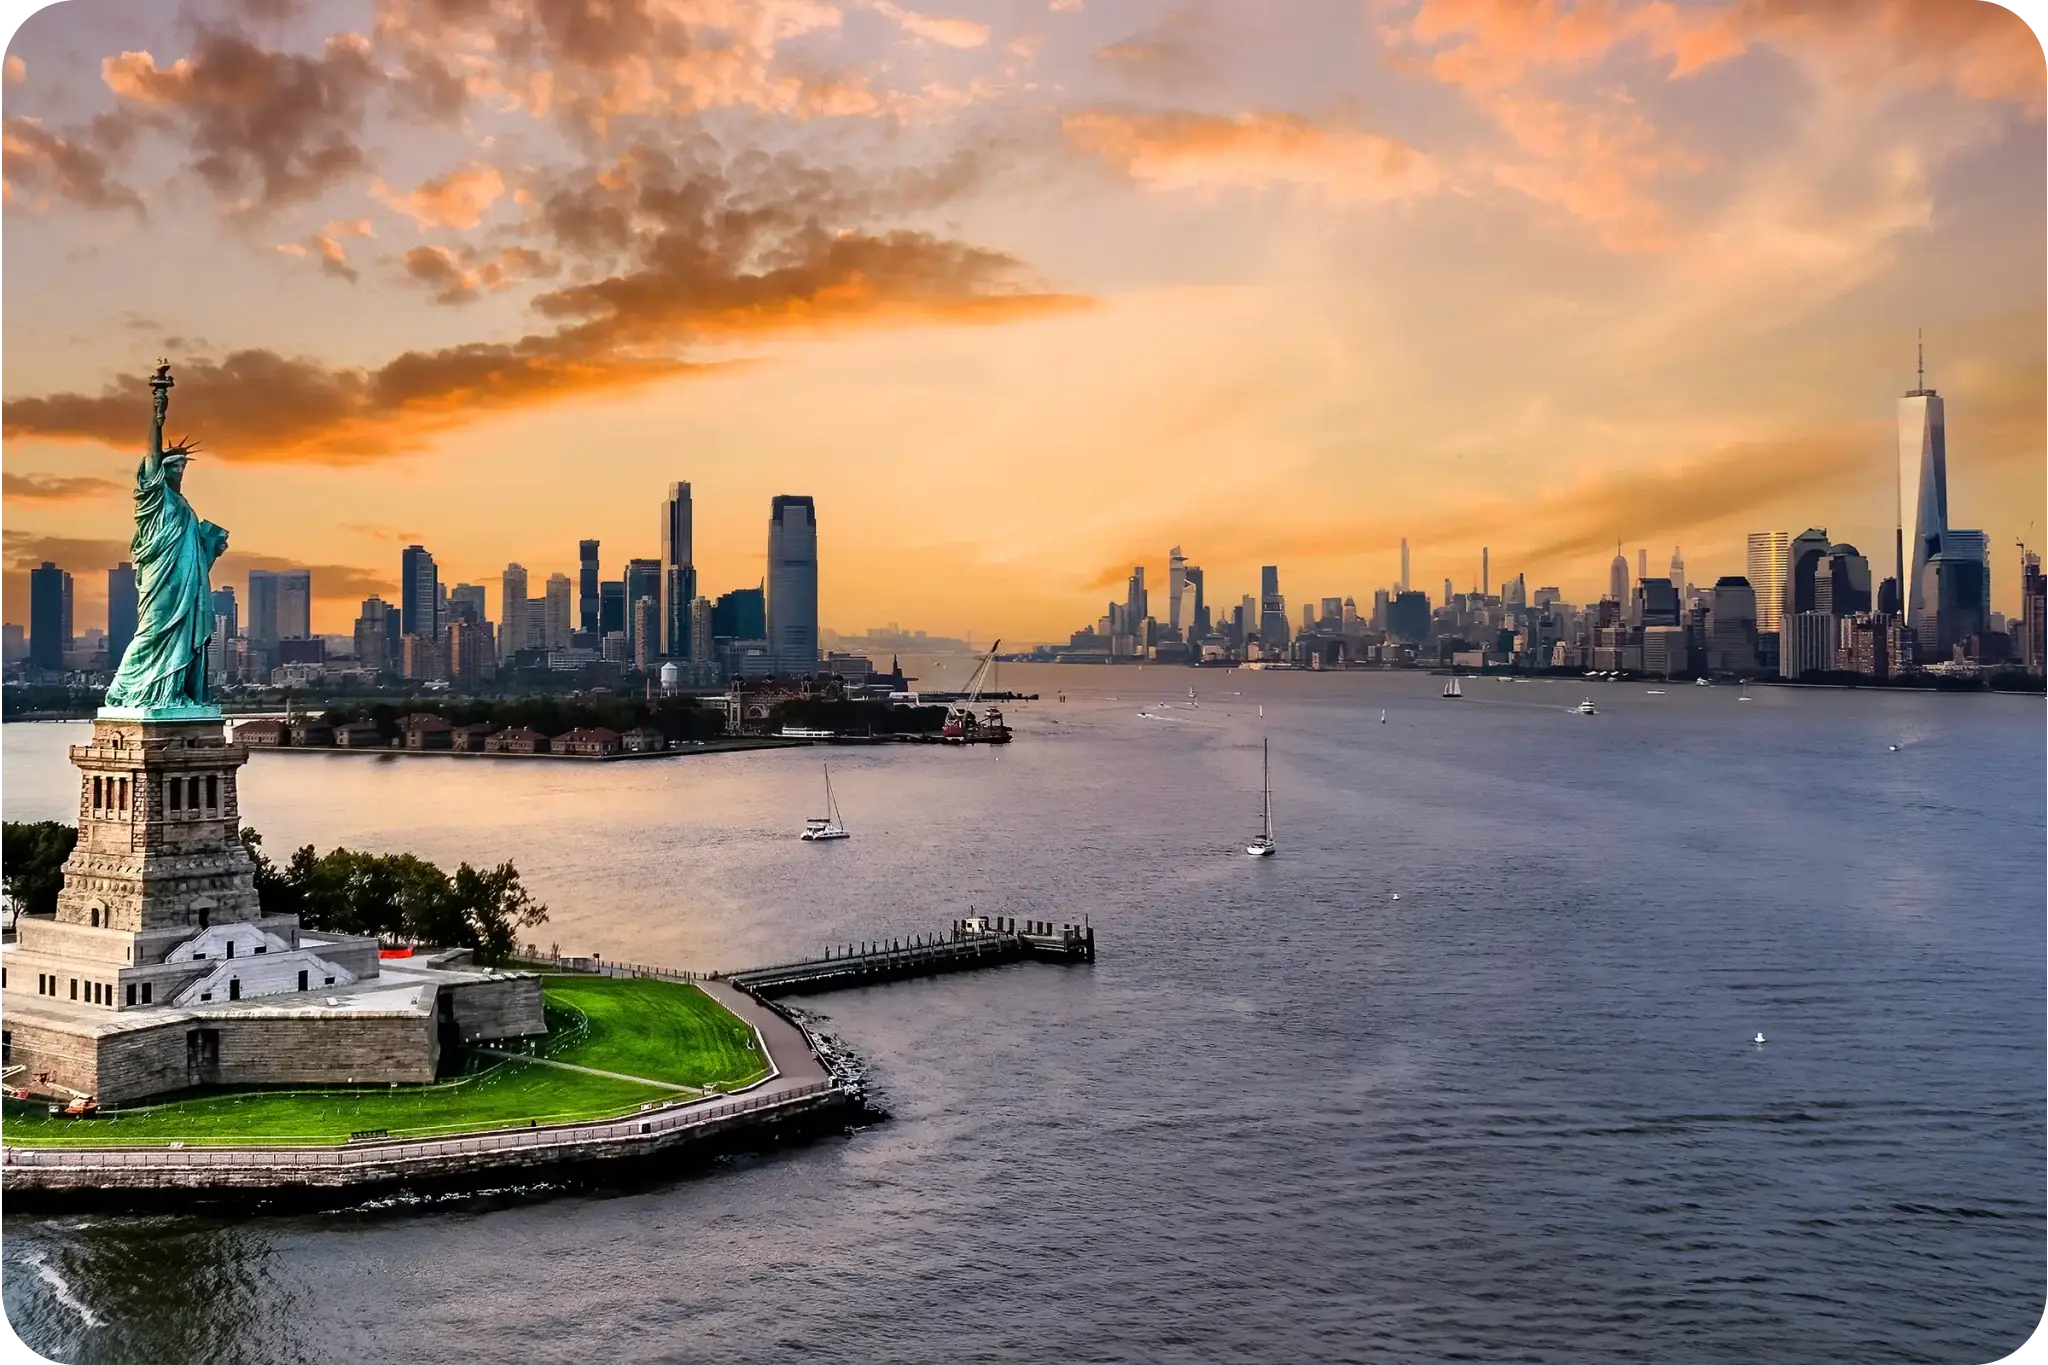 Statue of Liberty at sunset with New York City skyline in the background